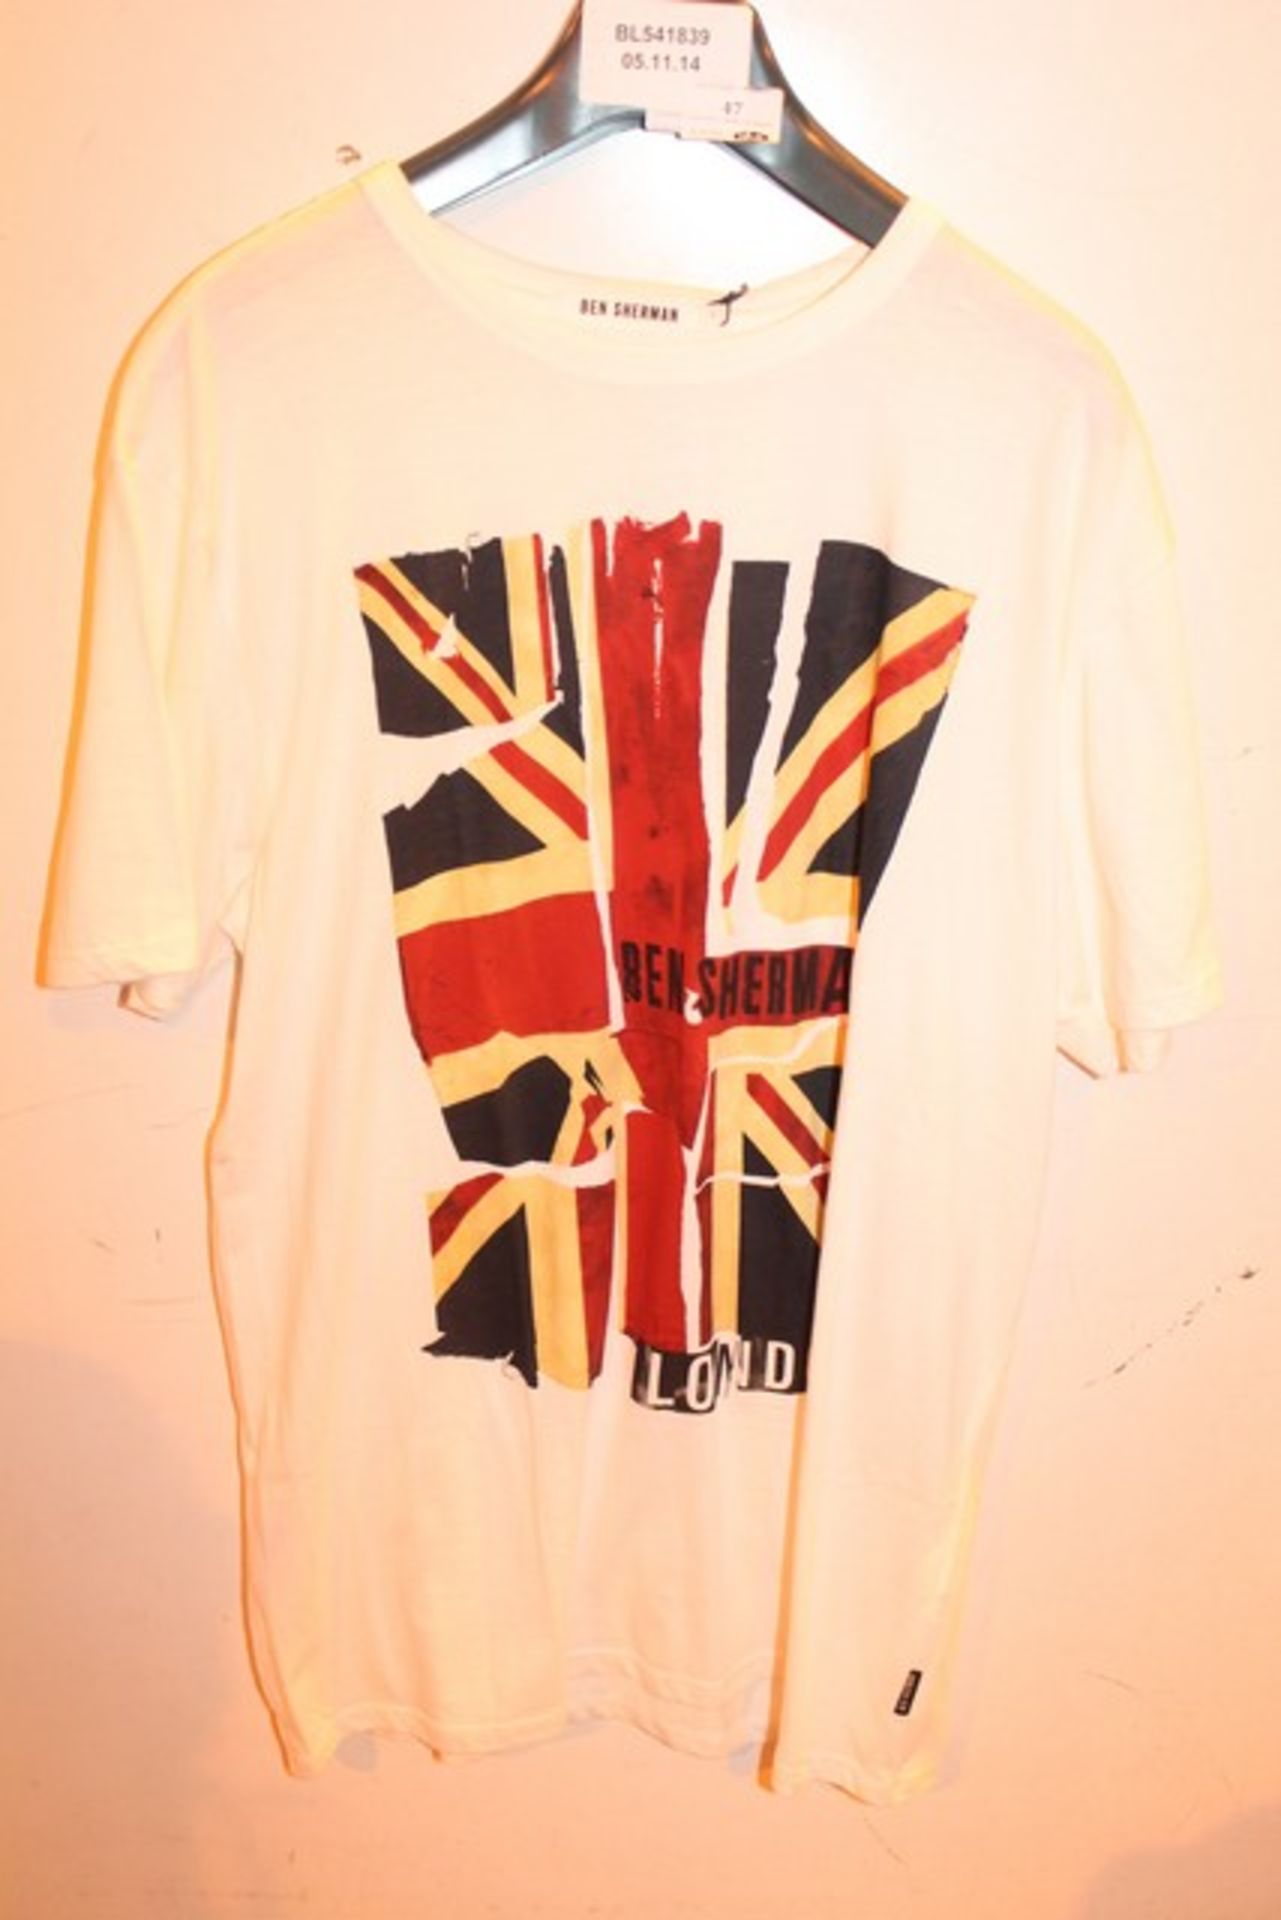 1 x BEN SHERMAN SIZE SMALL TSHIRT (541839)   *PLEASE NOTE THAT THE BID PRICE IS MULTIPLIED BY THE